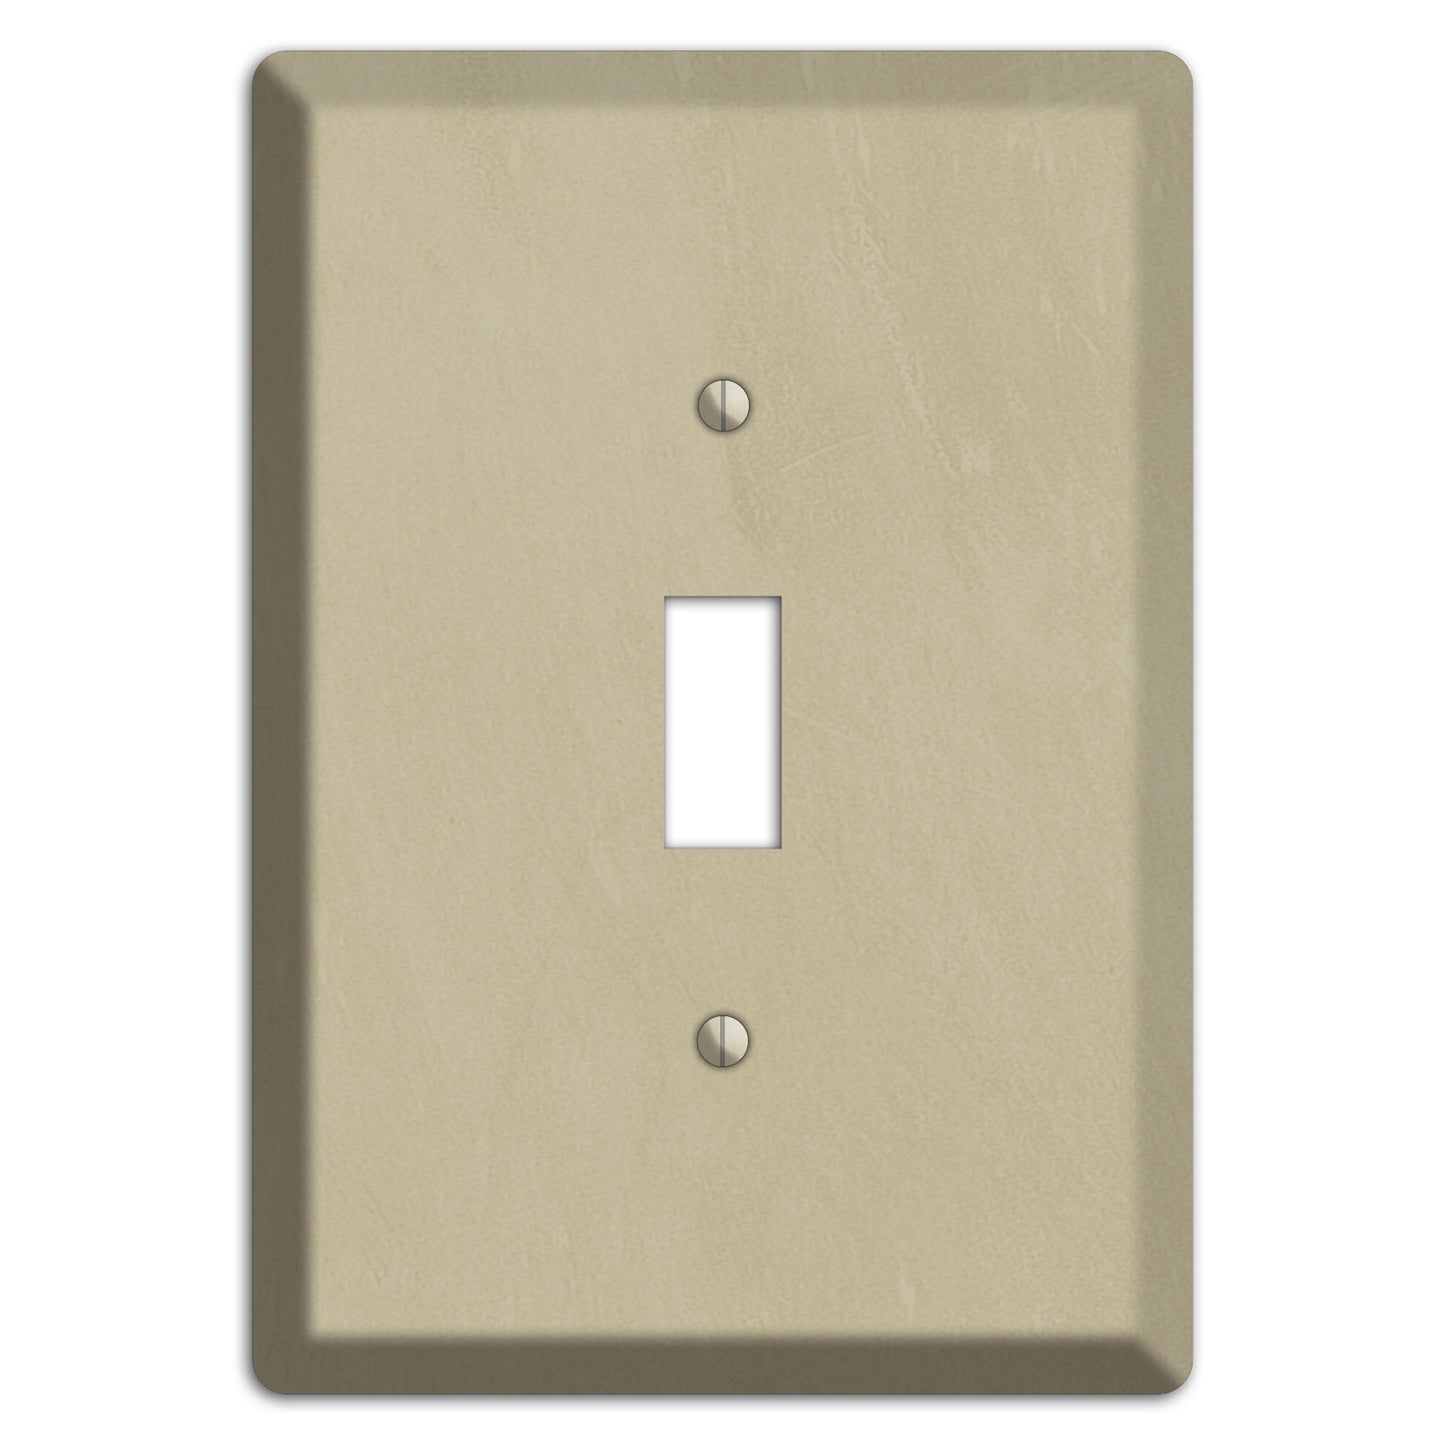 Chalk Beige Cover Plates